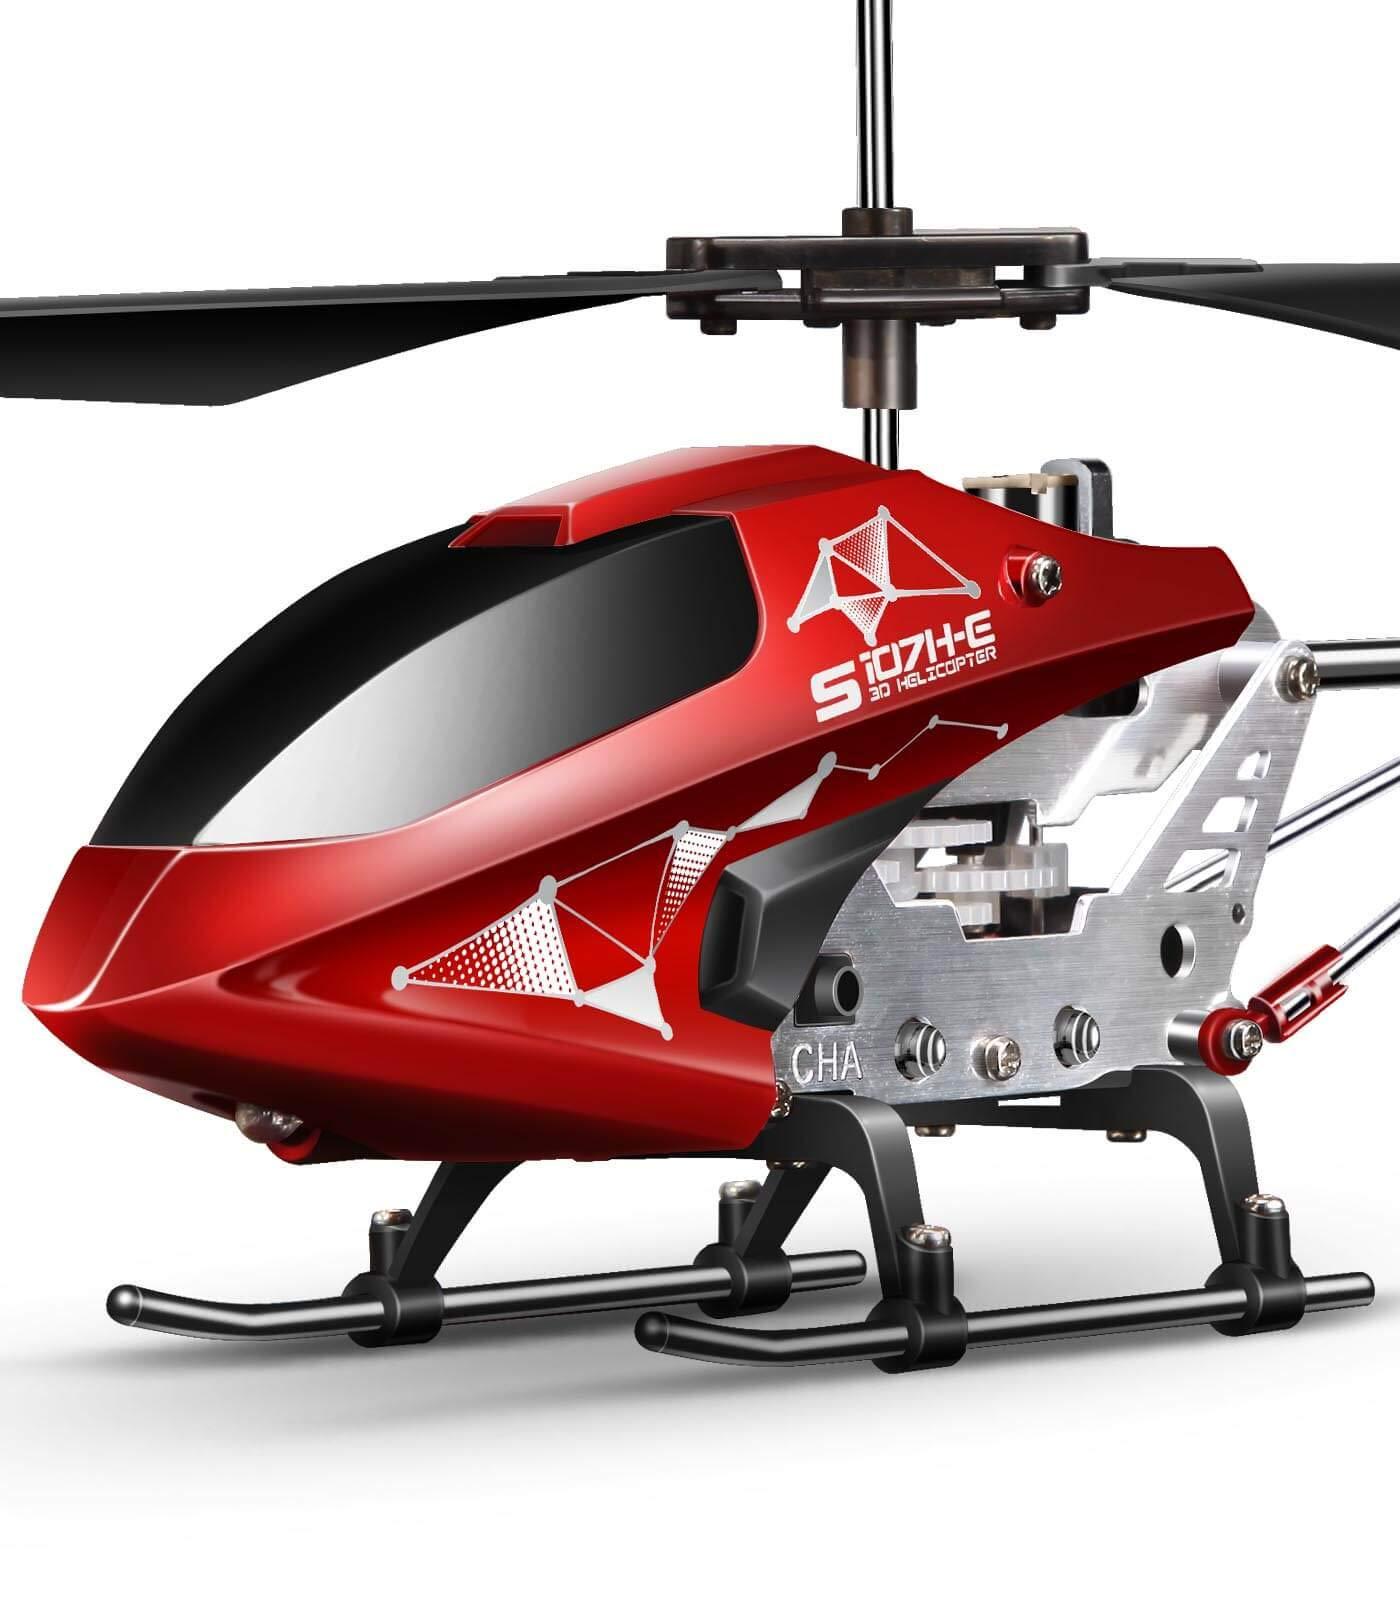 Large Beginner Rc Helicopter: Budget-friendly options for beginner RC helicopter enthusiasts